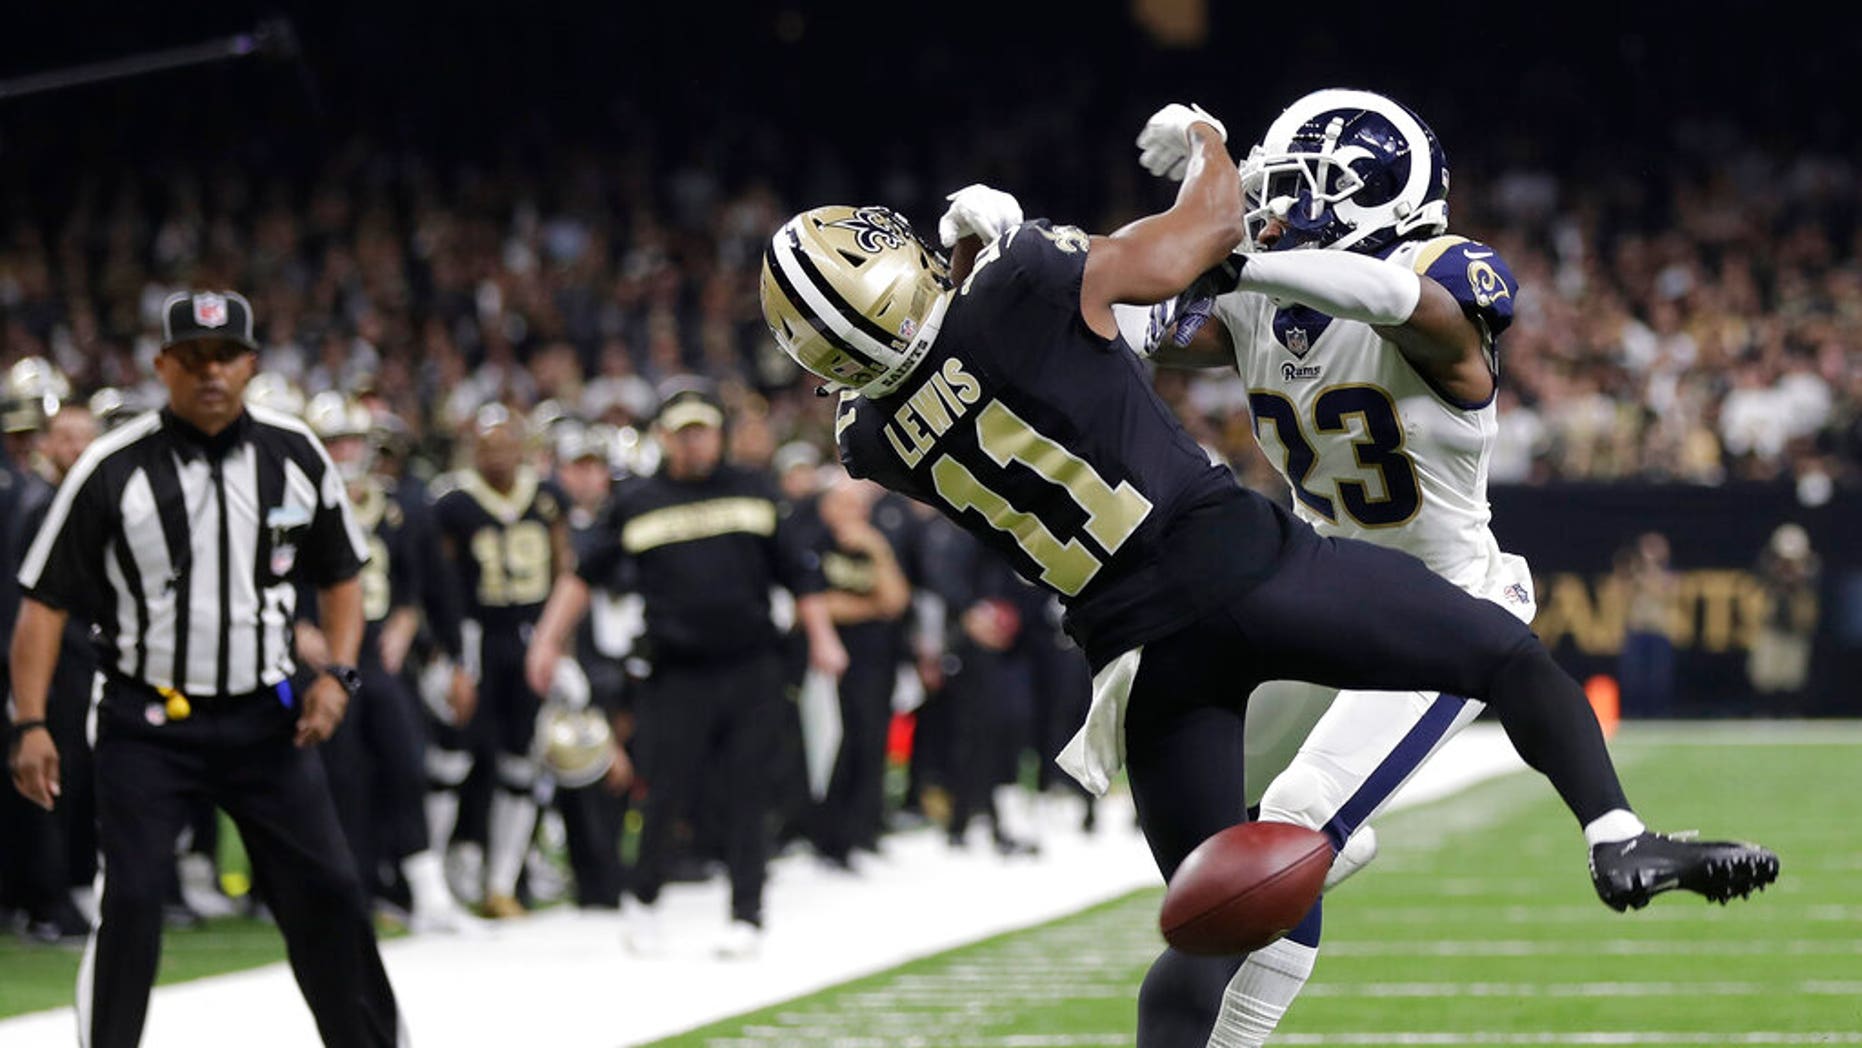 Saints fans call for rematch after controversial game sends Rams to Super Bowl